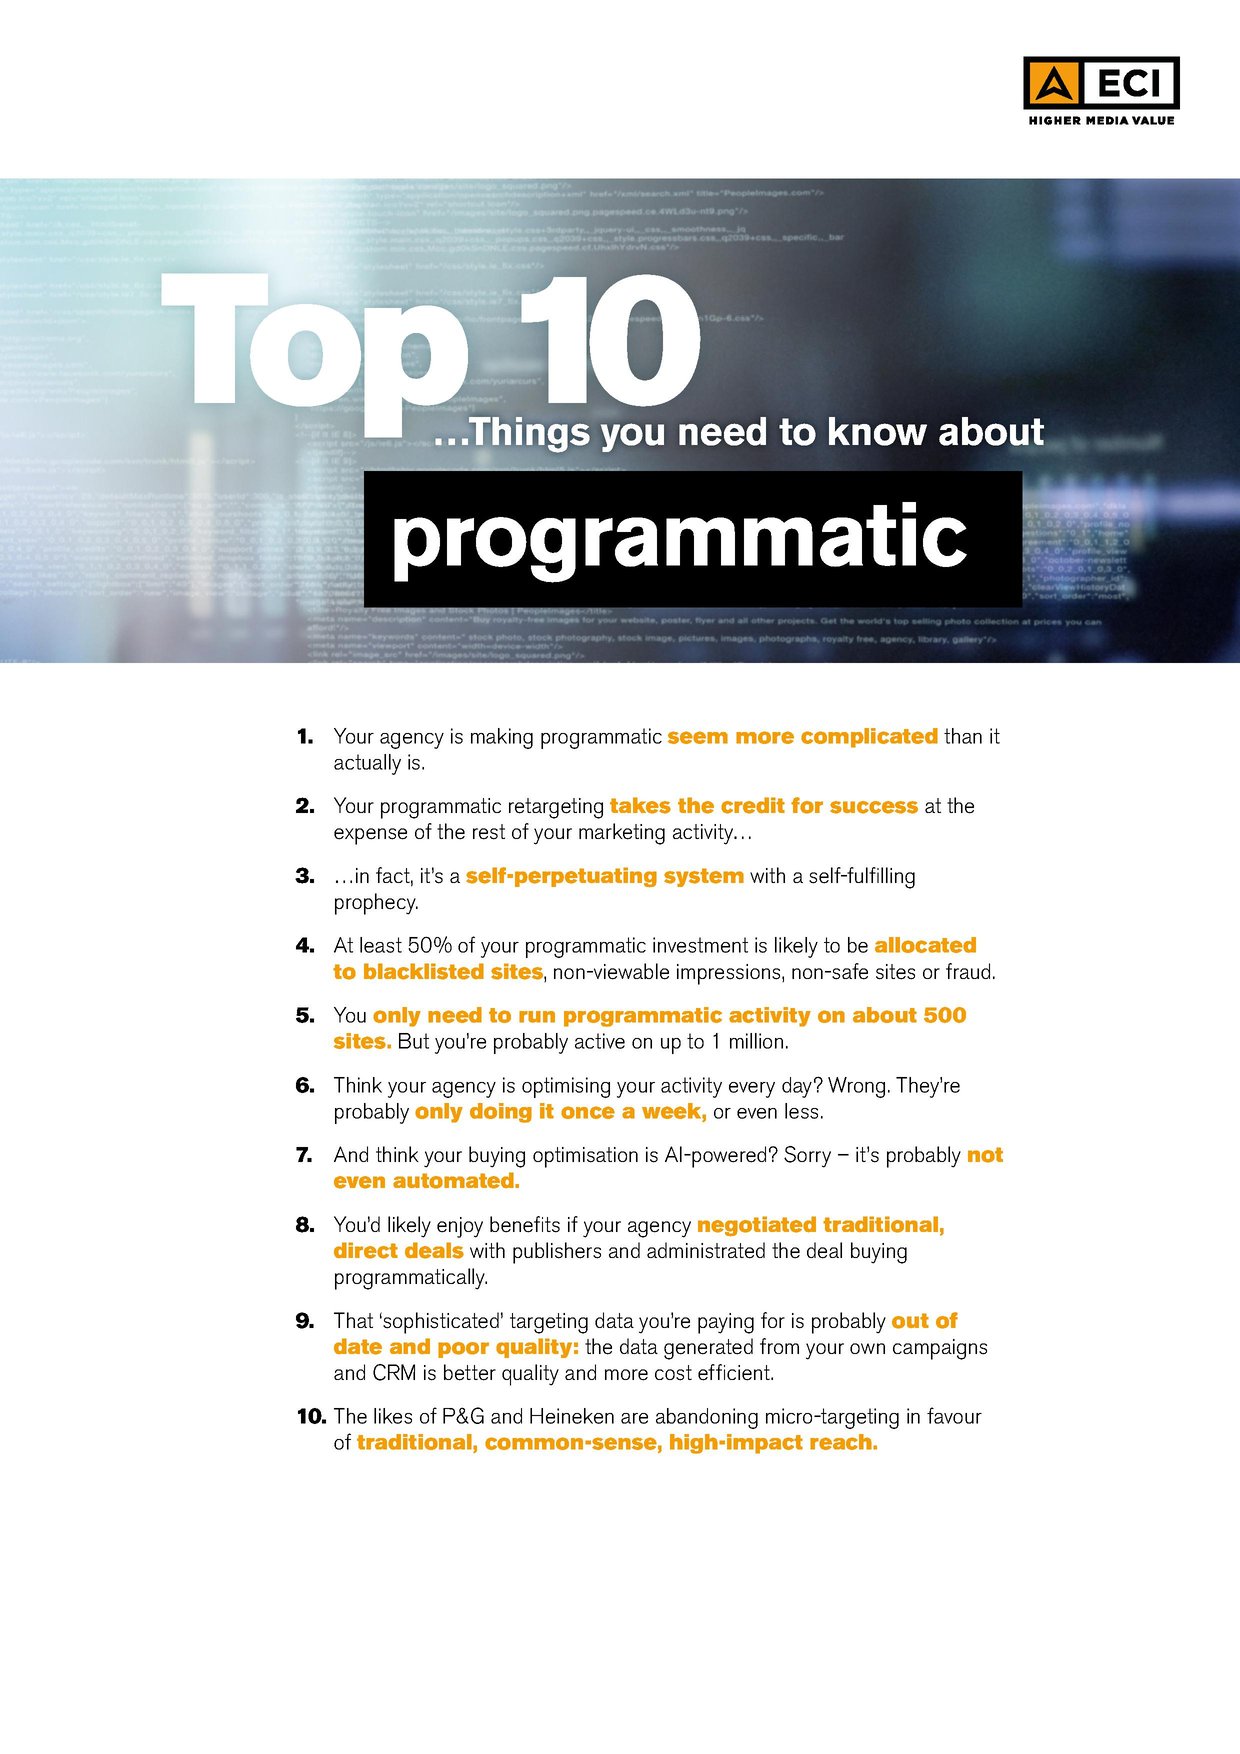 Top-10-Programmatic-you-need-to-know-about-Programmatic-1